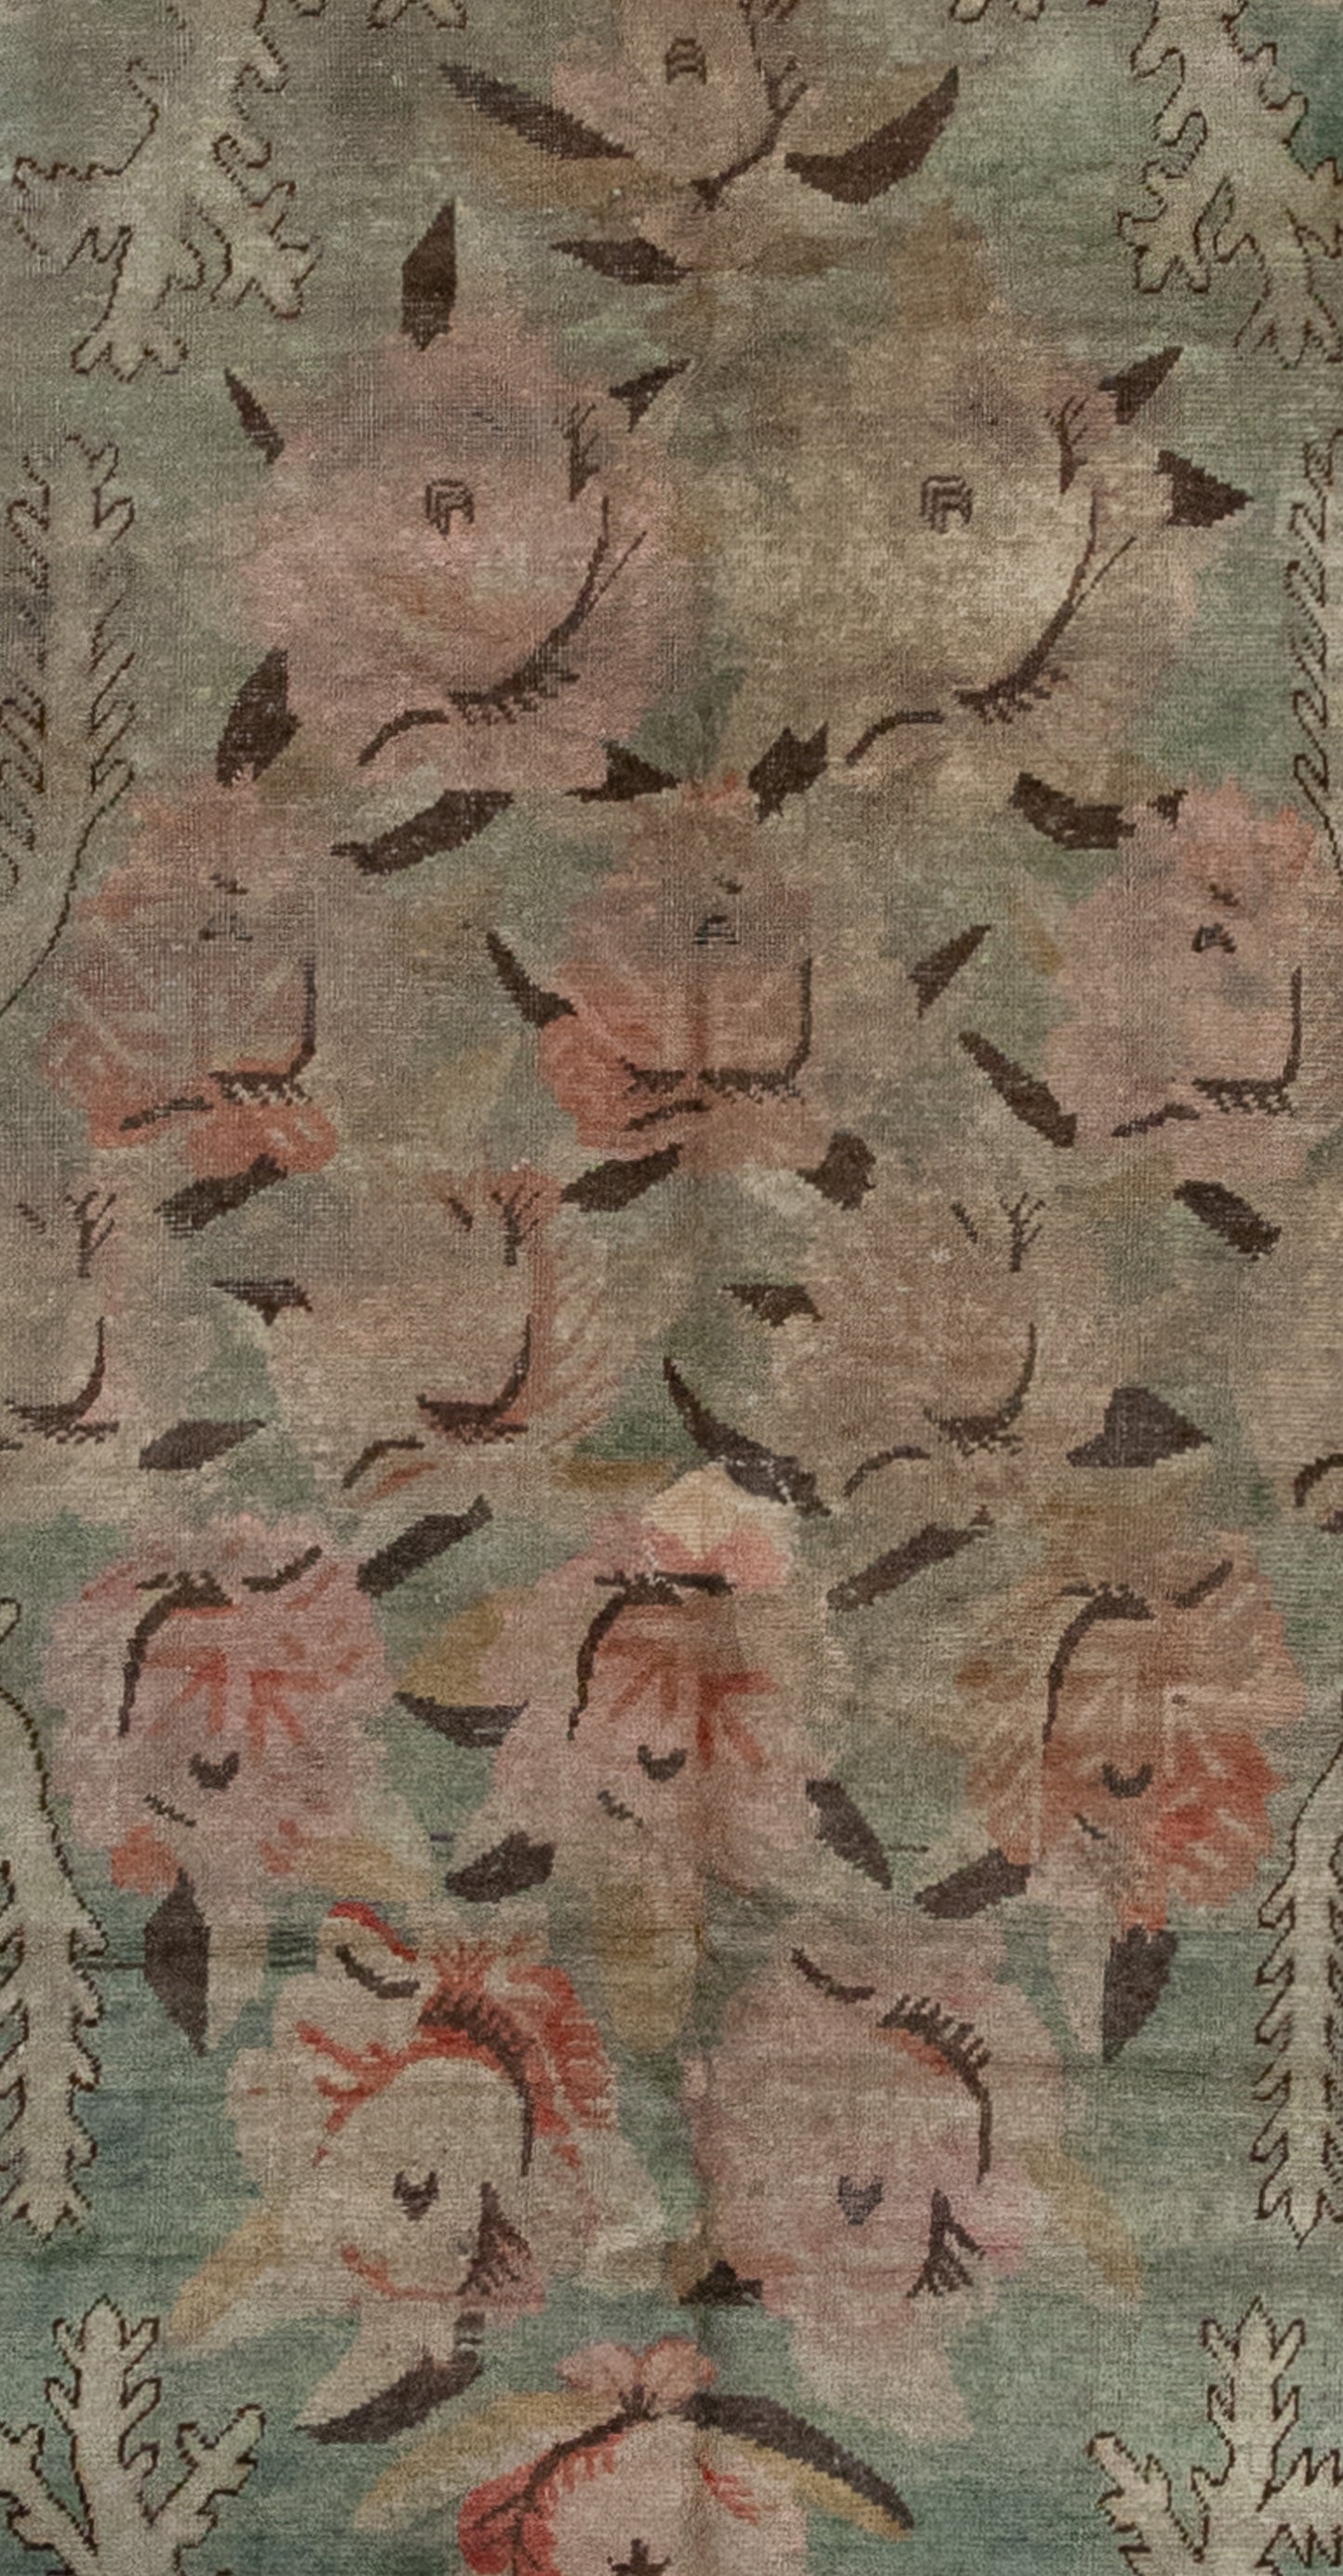 The center of the rug features 16 pink roses with black petals over green background.